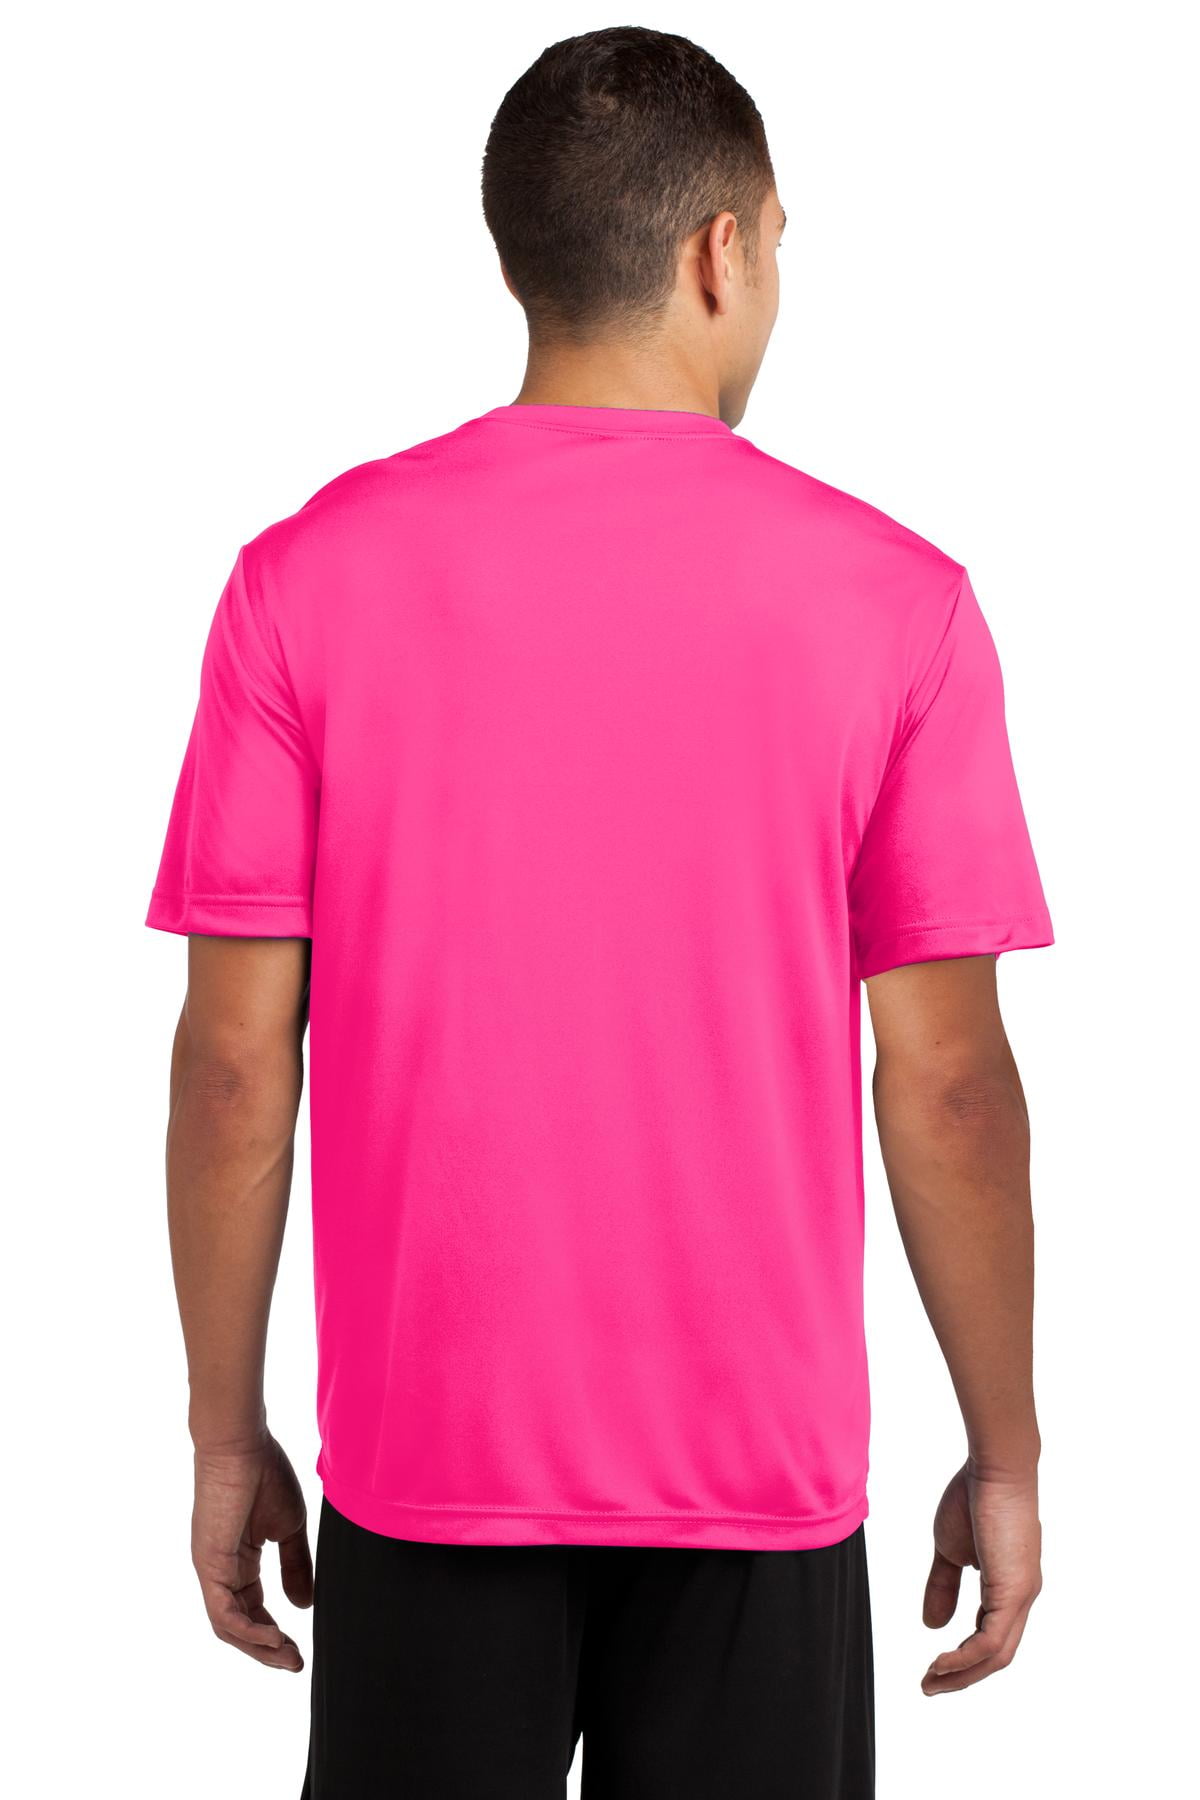 Sport-Tek Posicharge Competitor - L - St350 Neon Pink Tee